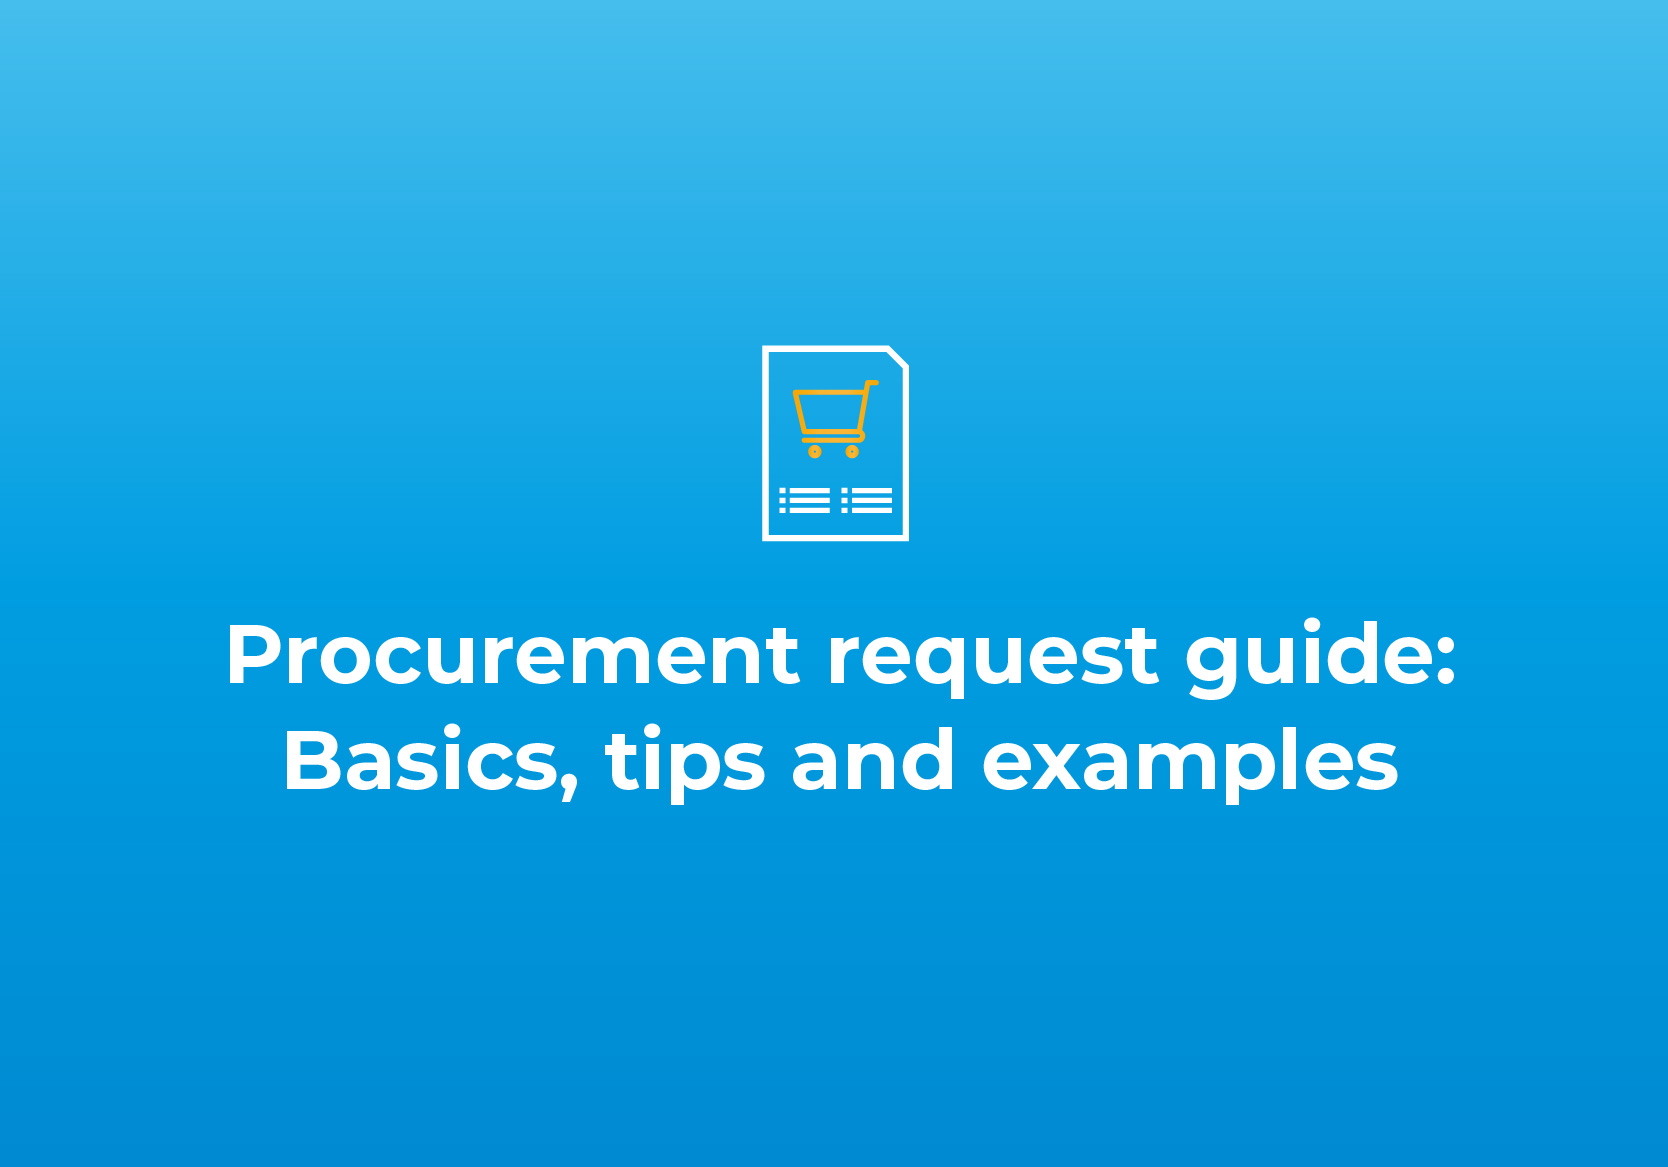 Procurement request guide: Basics, tips and examples